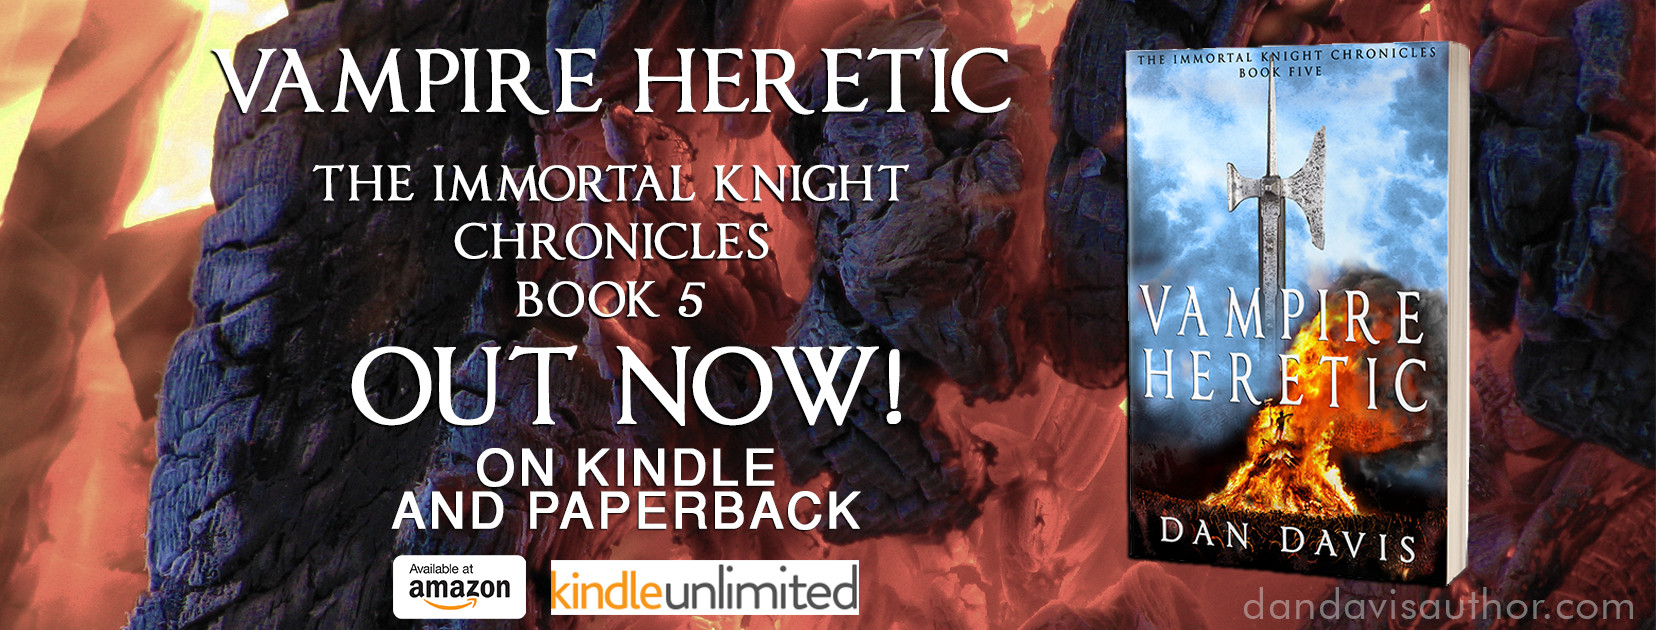 Vampire Heretic: the Immortal Knight Chronicles Book 5 – Out Now!